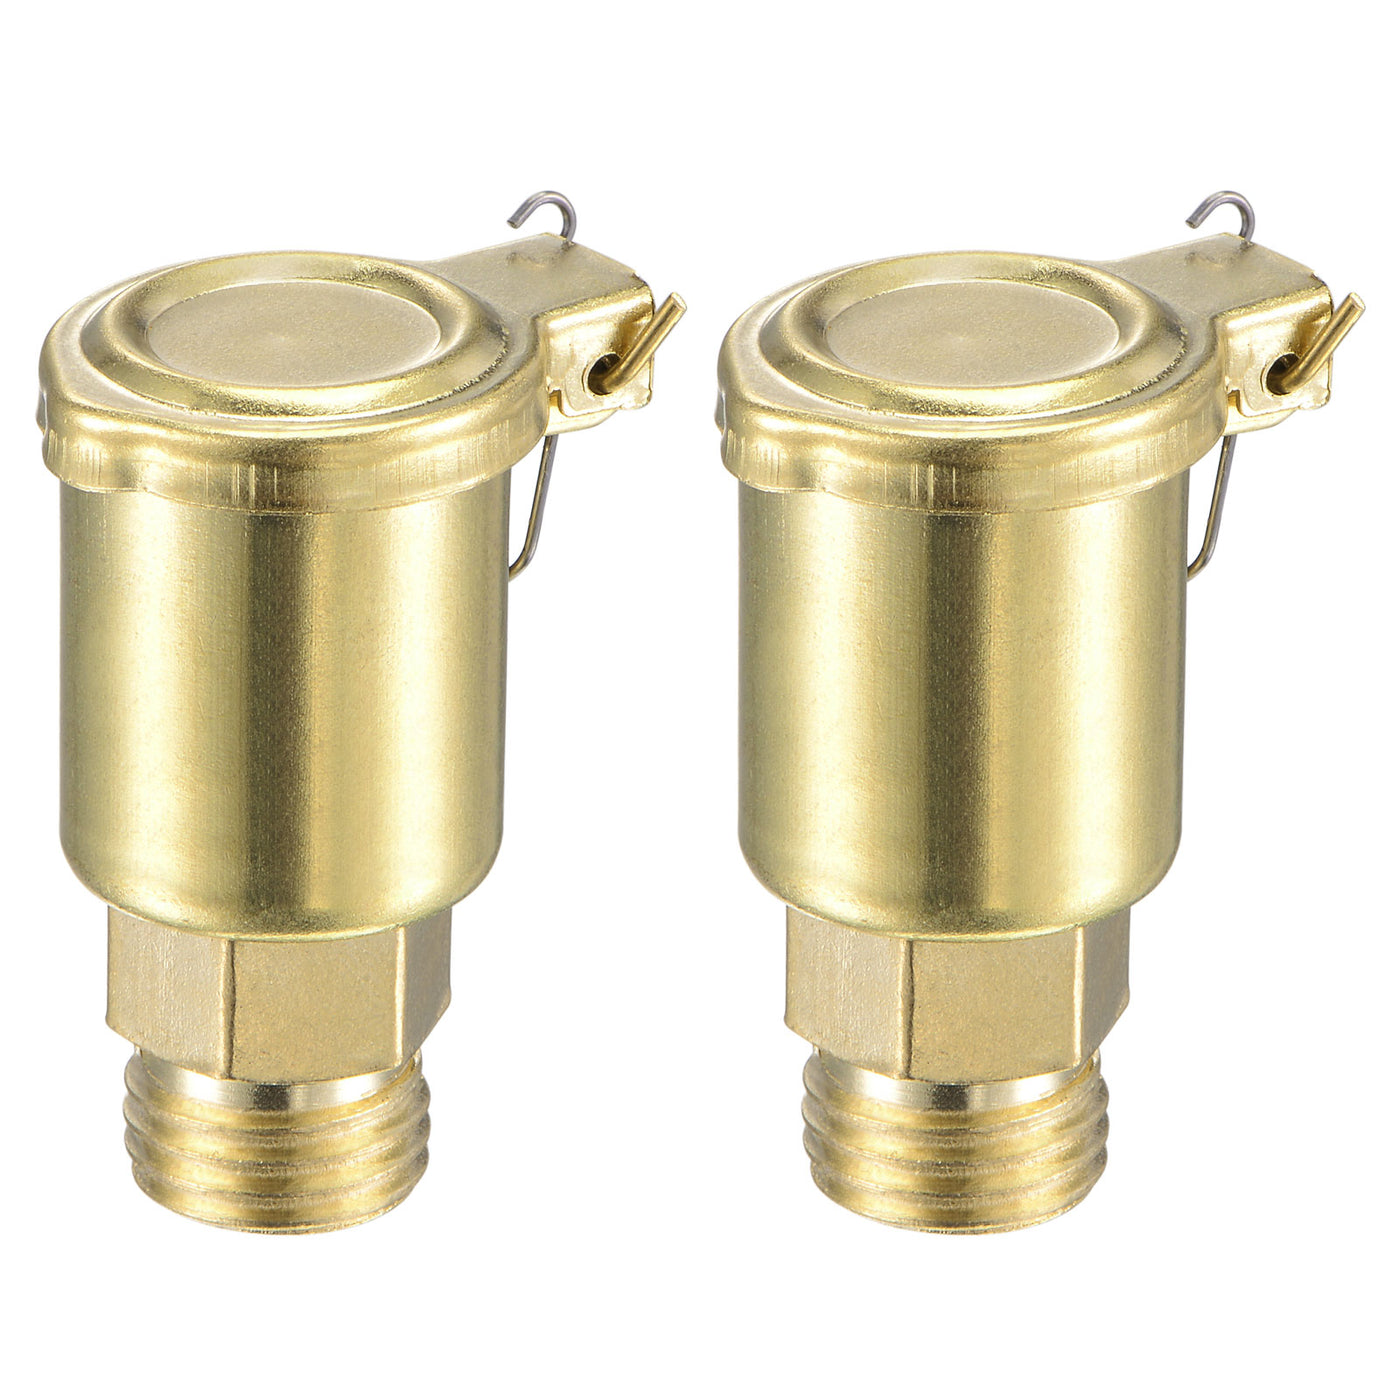 Uxcell Uxcell Spring Grease Oil Cup Cap M14x1.5 Male Thread 3ml Copper Plating Machine Parts 2Pcs